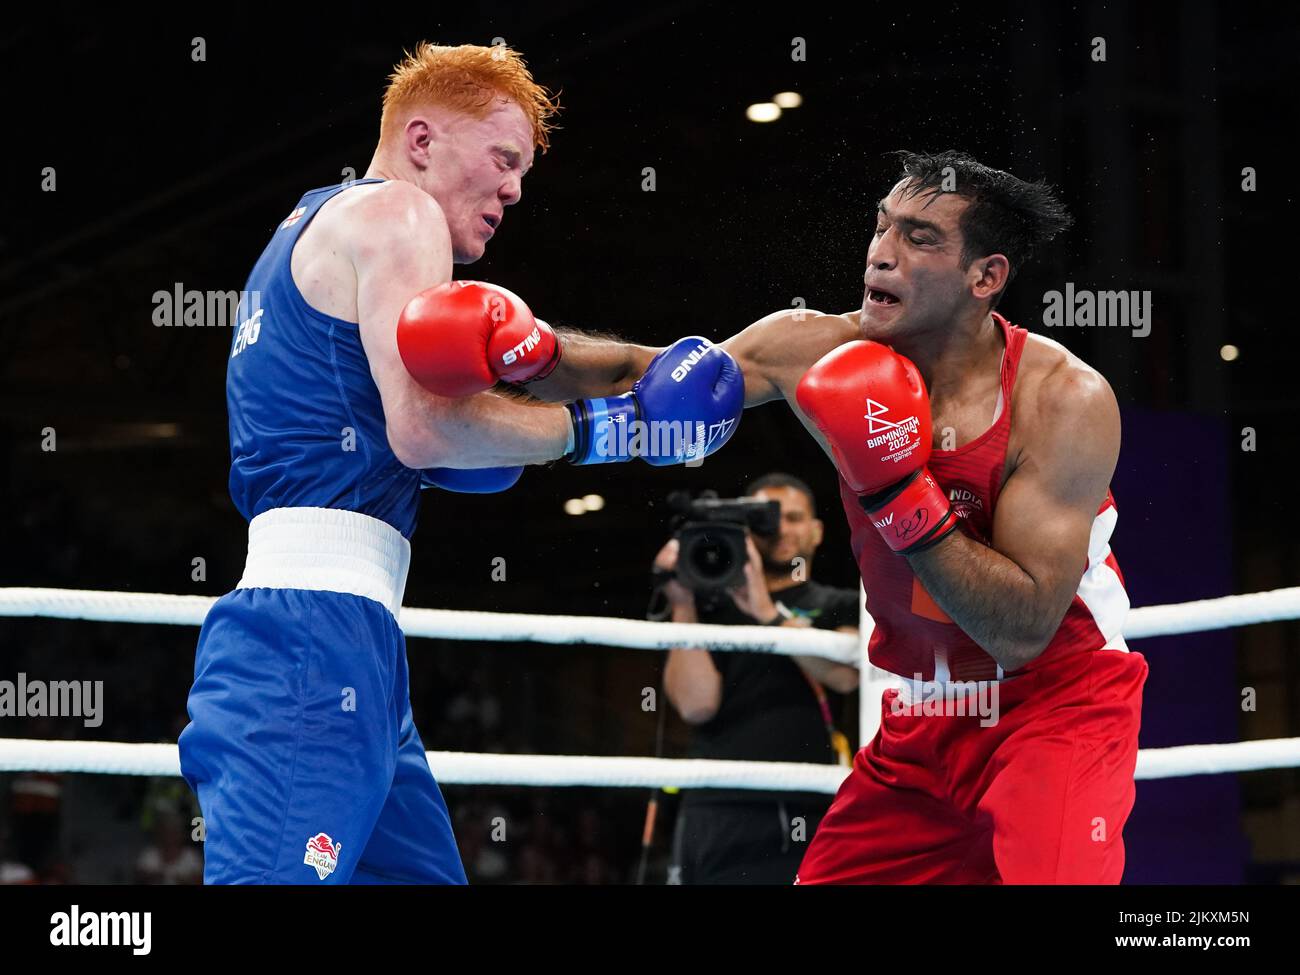 India's Ashish Kumar (right) and England's Aaron Bowen during the Men’s Over 75kg-80kg (Light Heavyweight) - Quarter-Final 3 at The NEC on day six of the 2022 Commonwealth Games in Birmingham. Picture date: Wednesday August 3, 2022. Stock Photo